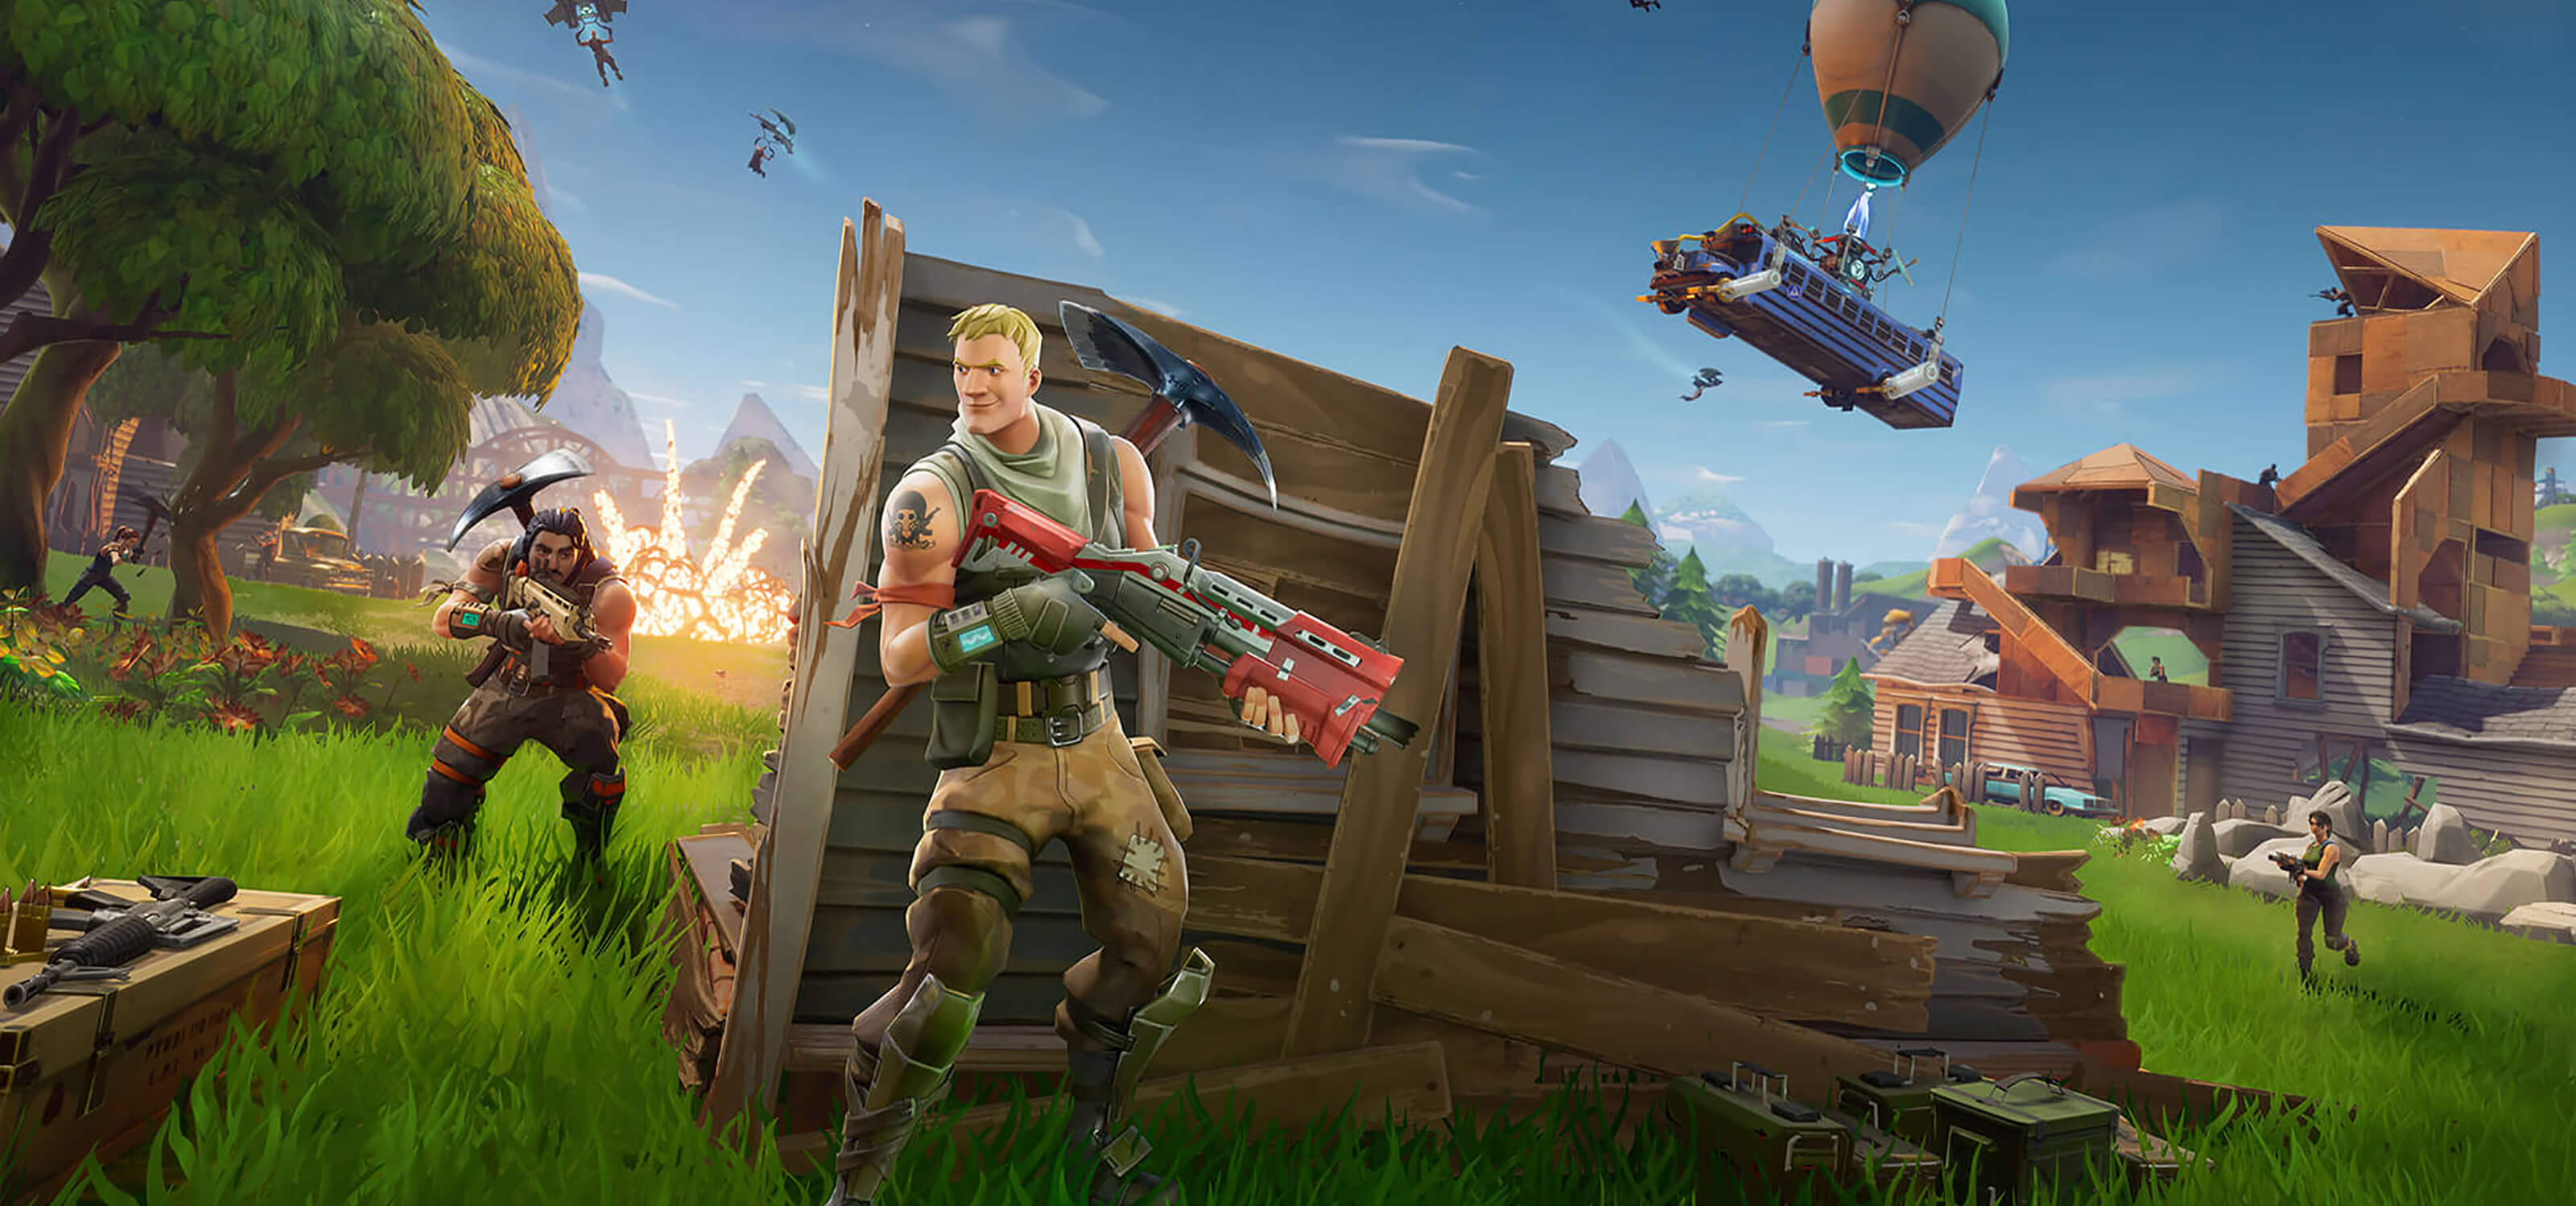 Screenshot from Epic Games' Fortnite featuring a character smiling as he hides behind a wooden barricade